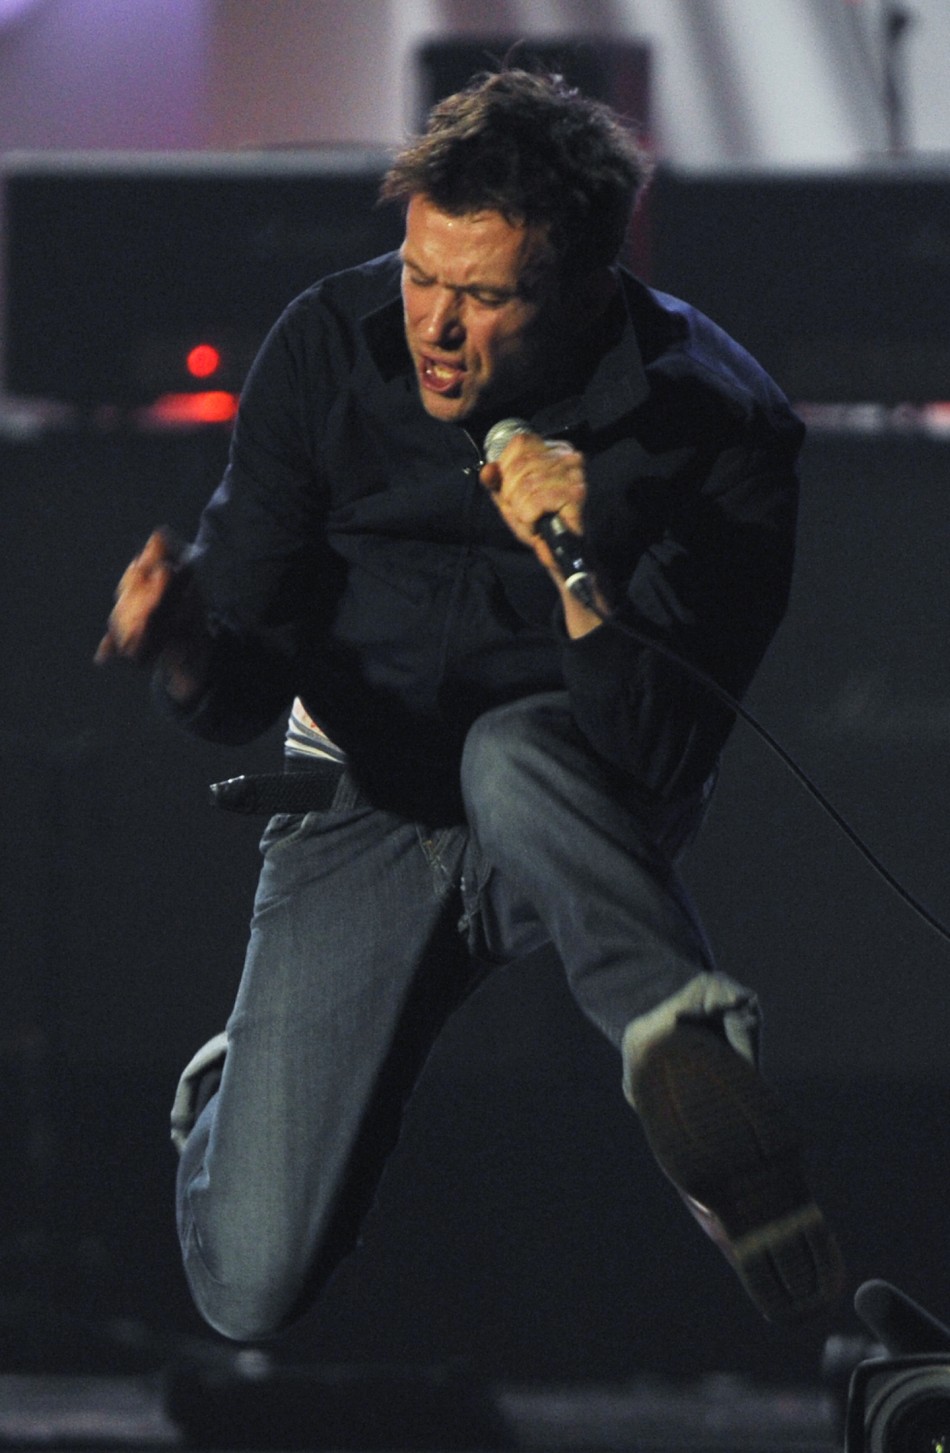 Damon Albarn performs with his band Blur during the BRIT Music Awards at the O2 Arena in London